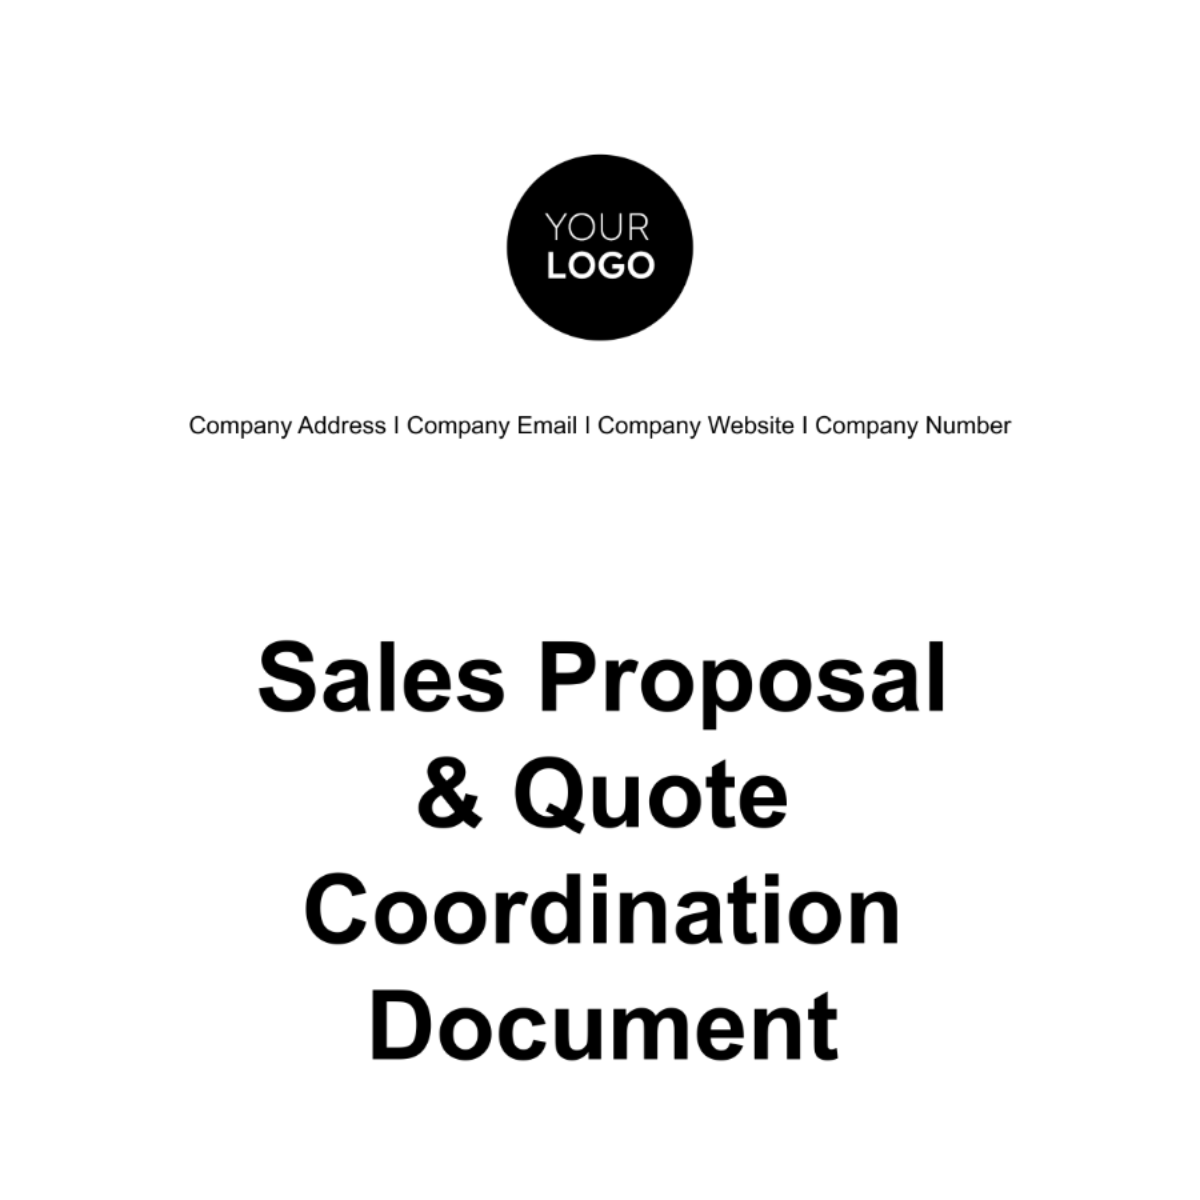 Sales Proposal & Quote Coordination Document Template